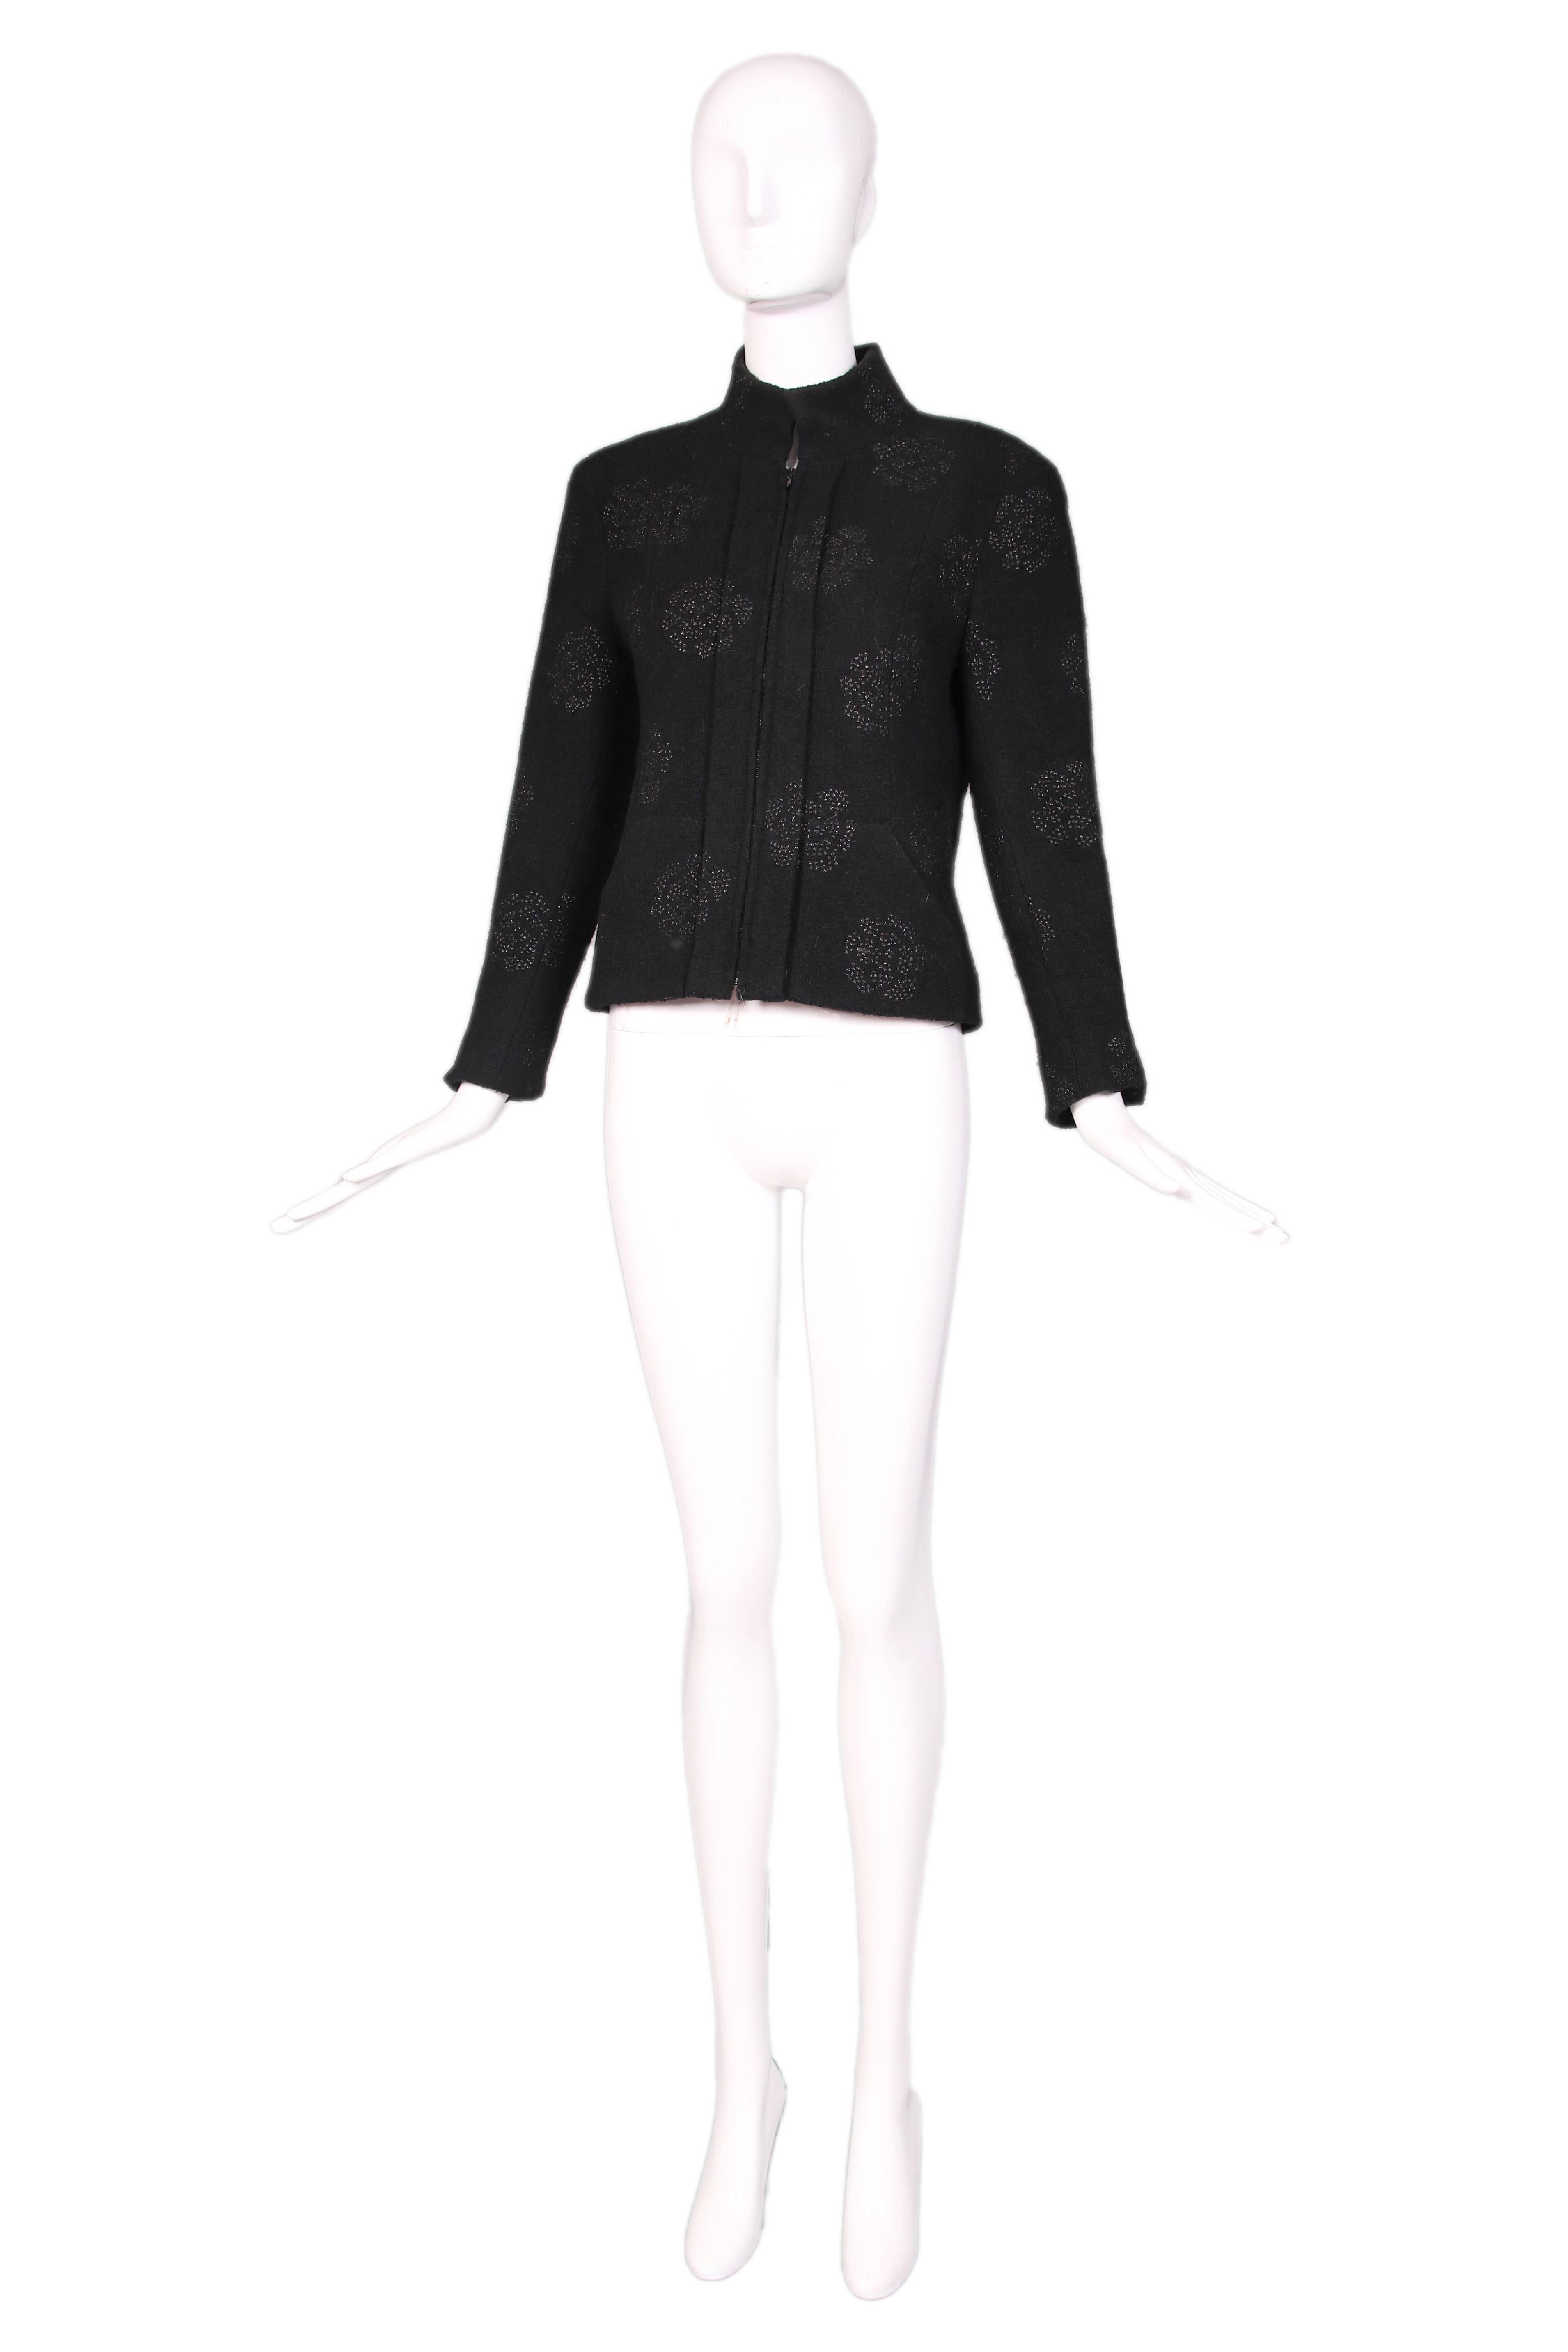 Chanel black wool boucle zipper front jacket with stand collar and sparkly camellia flower print most likely made out of raffia. Lined entirely in camellia print silk. In excellent condition. Size EU 40. 
MEASUREMENTS:
Bust - 38"
Waist -